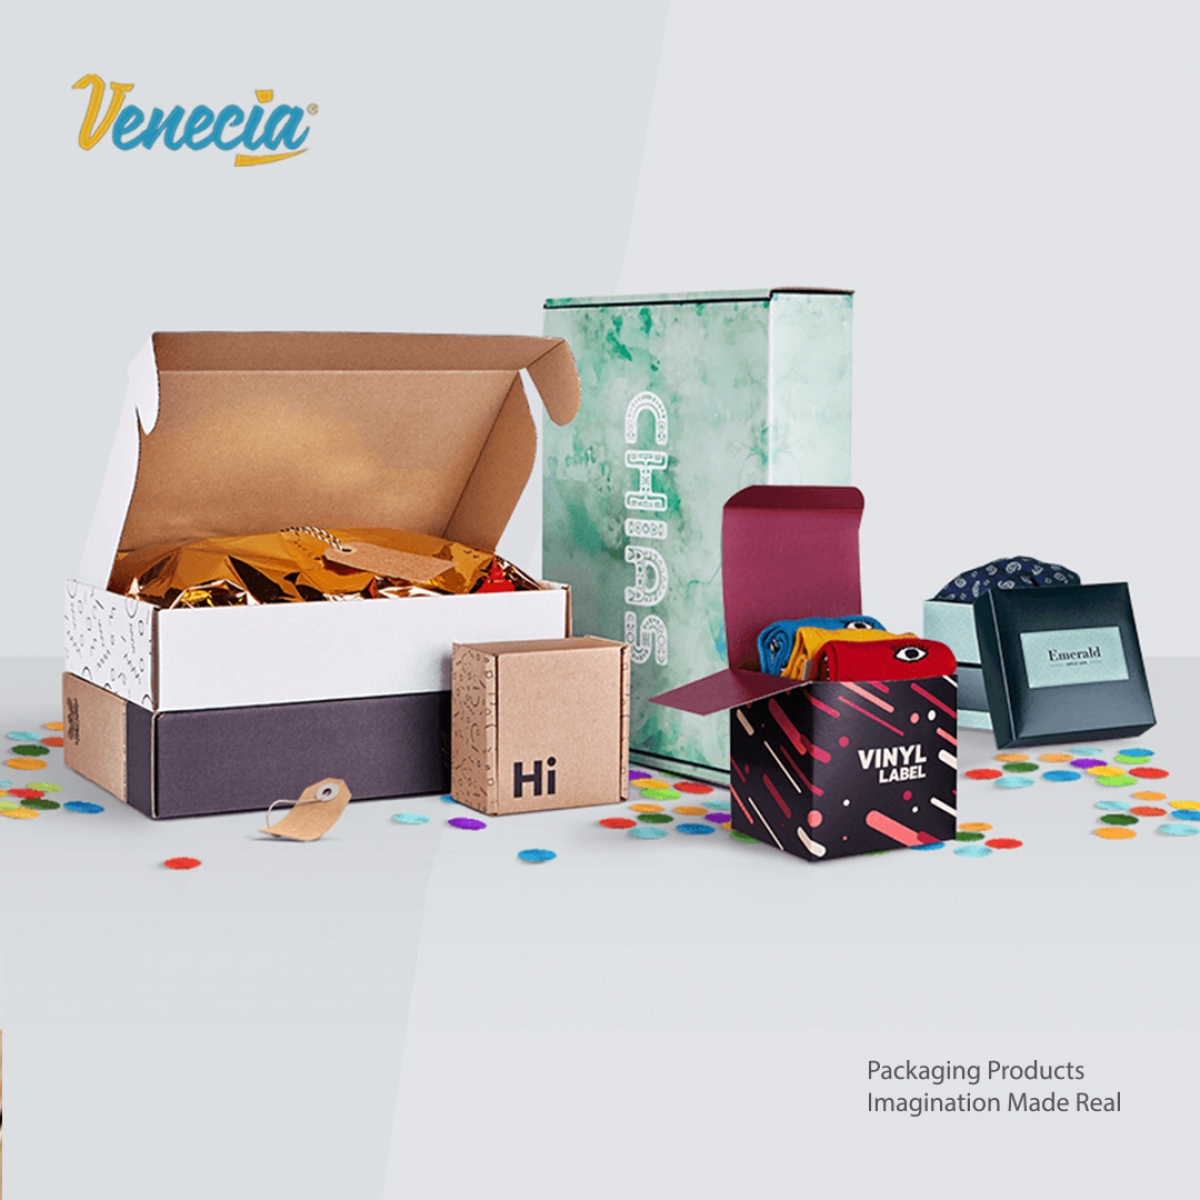 Stand Out in This Competitive Market with Custom Serum Boxes that Highlight Your Brand